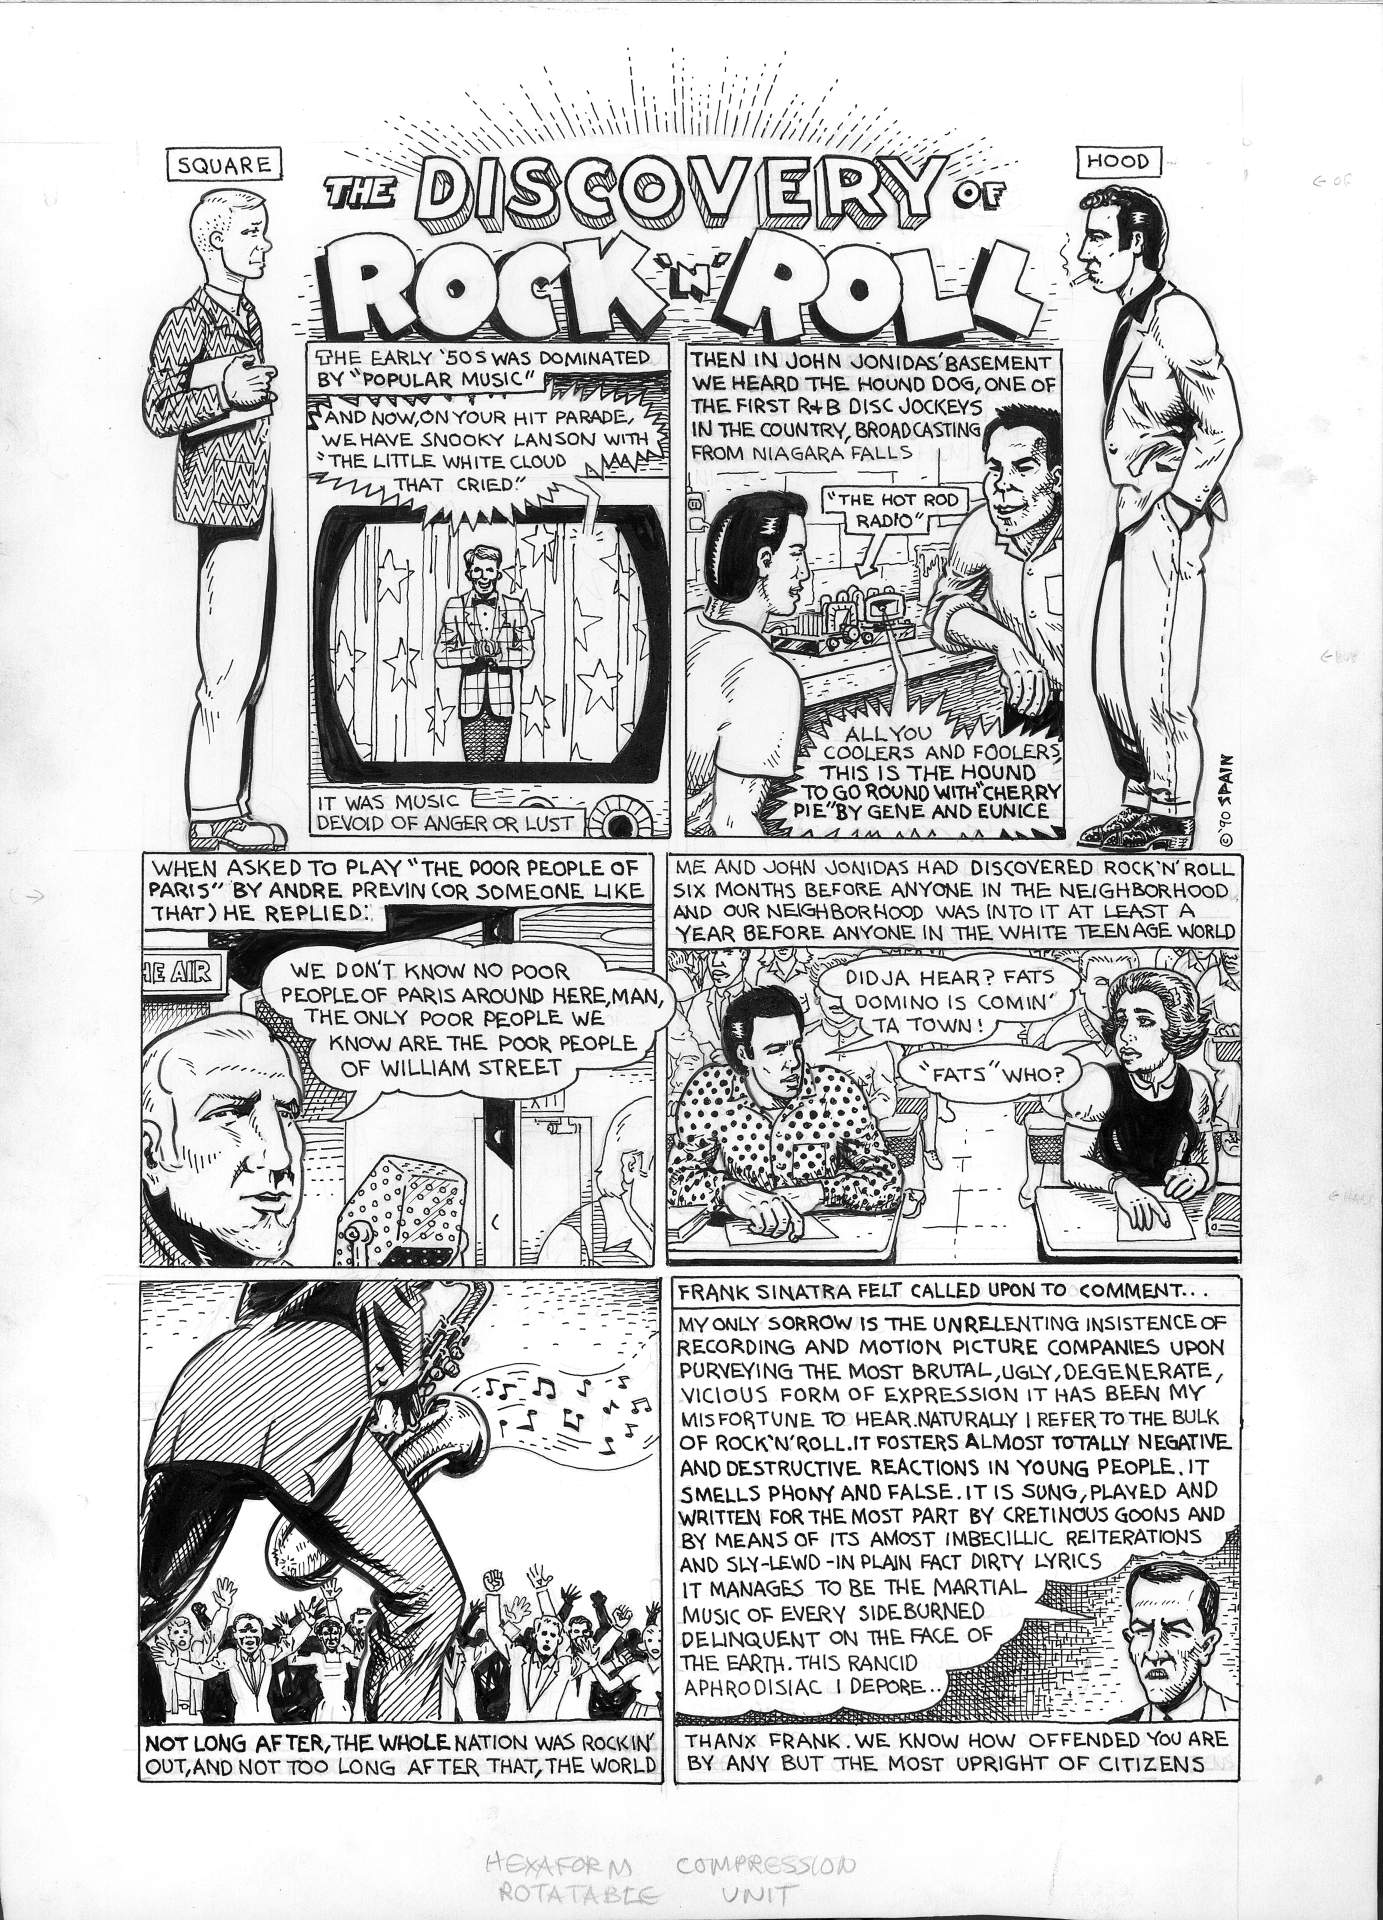 from My True Story: The Discovery of Rock ‘n’ Roll, p.8